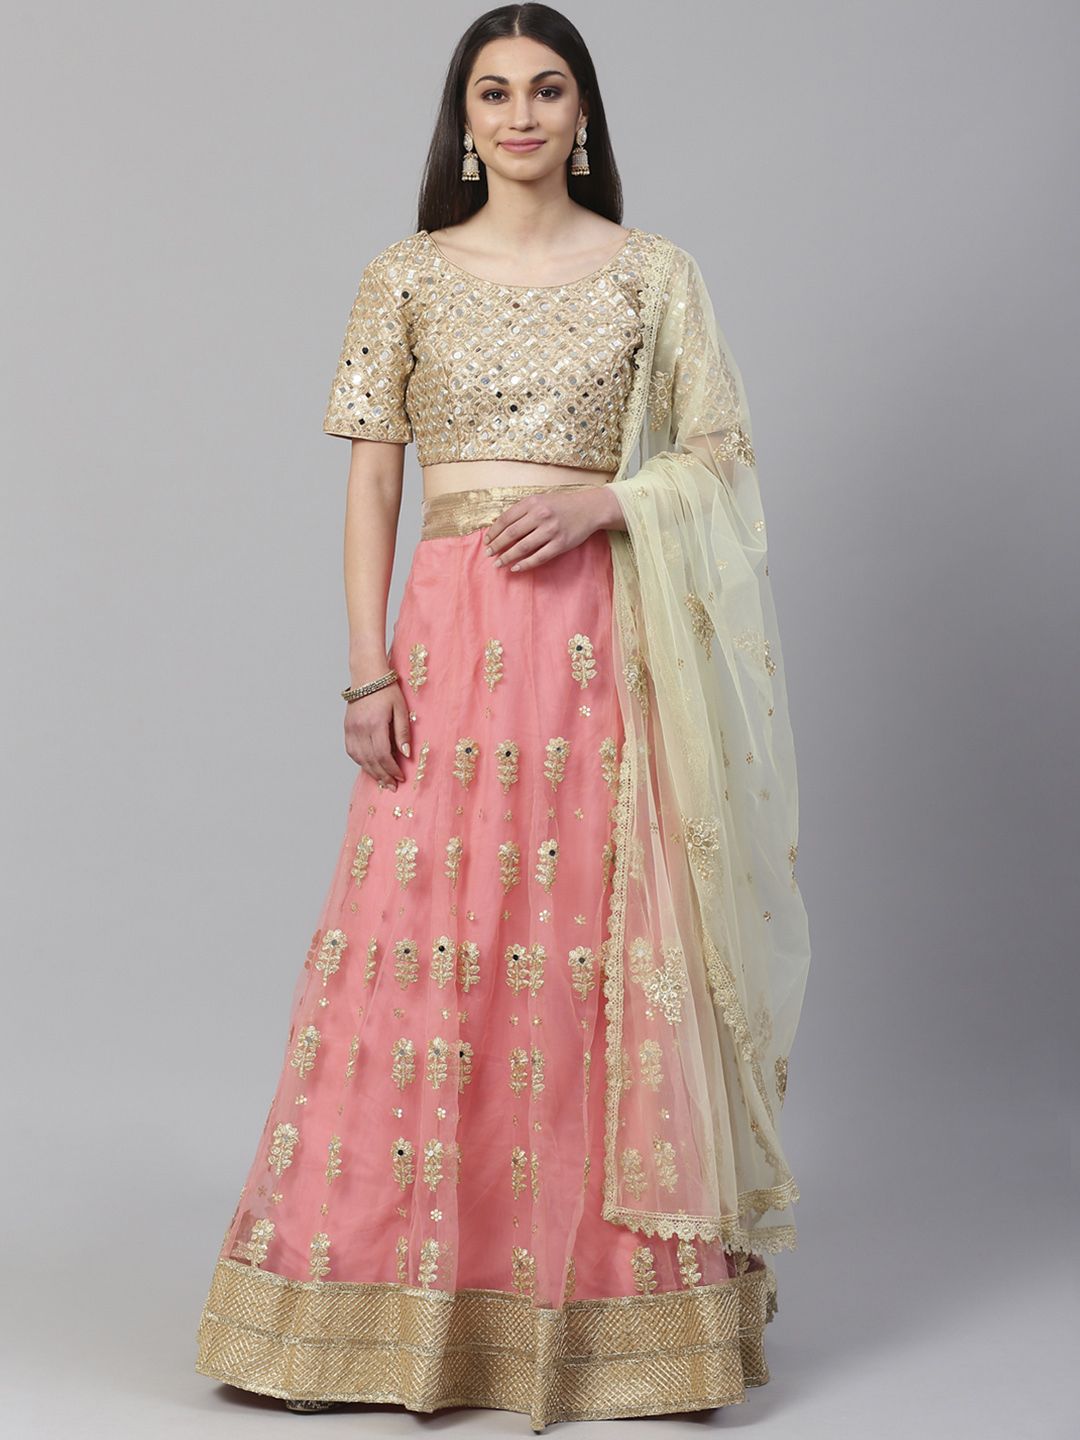 Readiprint Fashions Peach-Coloured & Beige Embroidered Semi-Stitched Lehenga & Unstitched Blouse with Dupatta Price in India